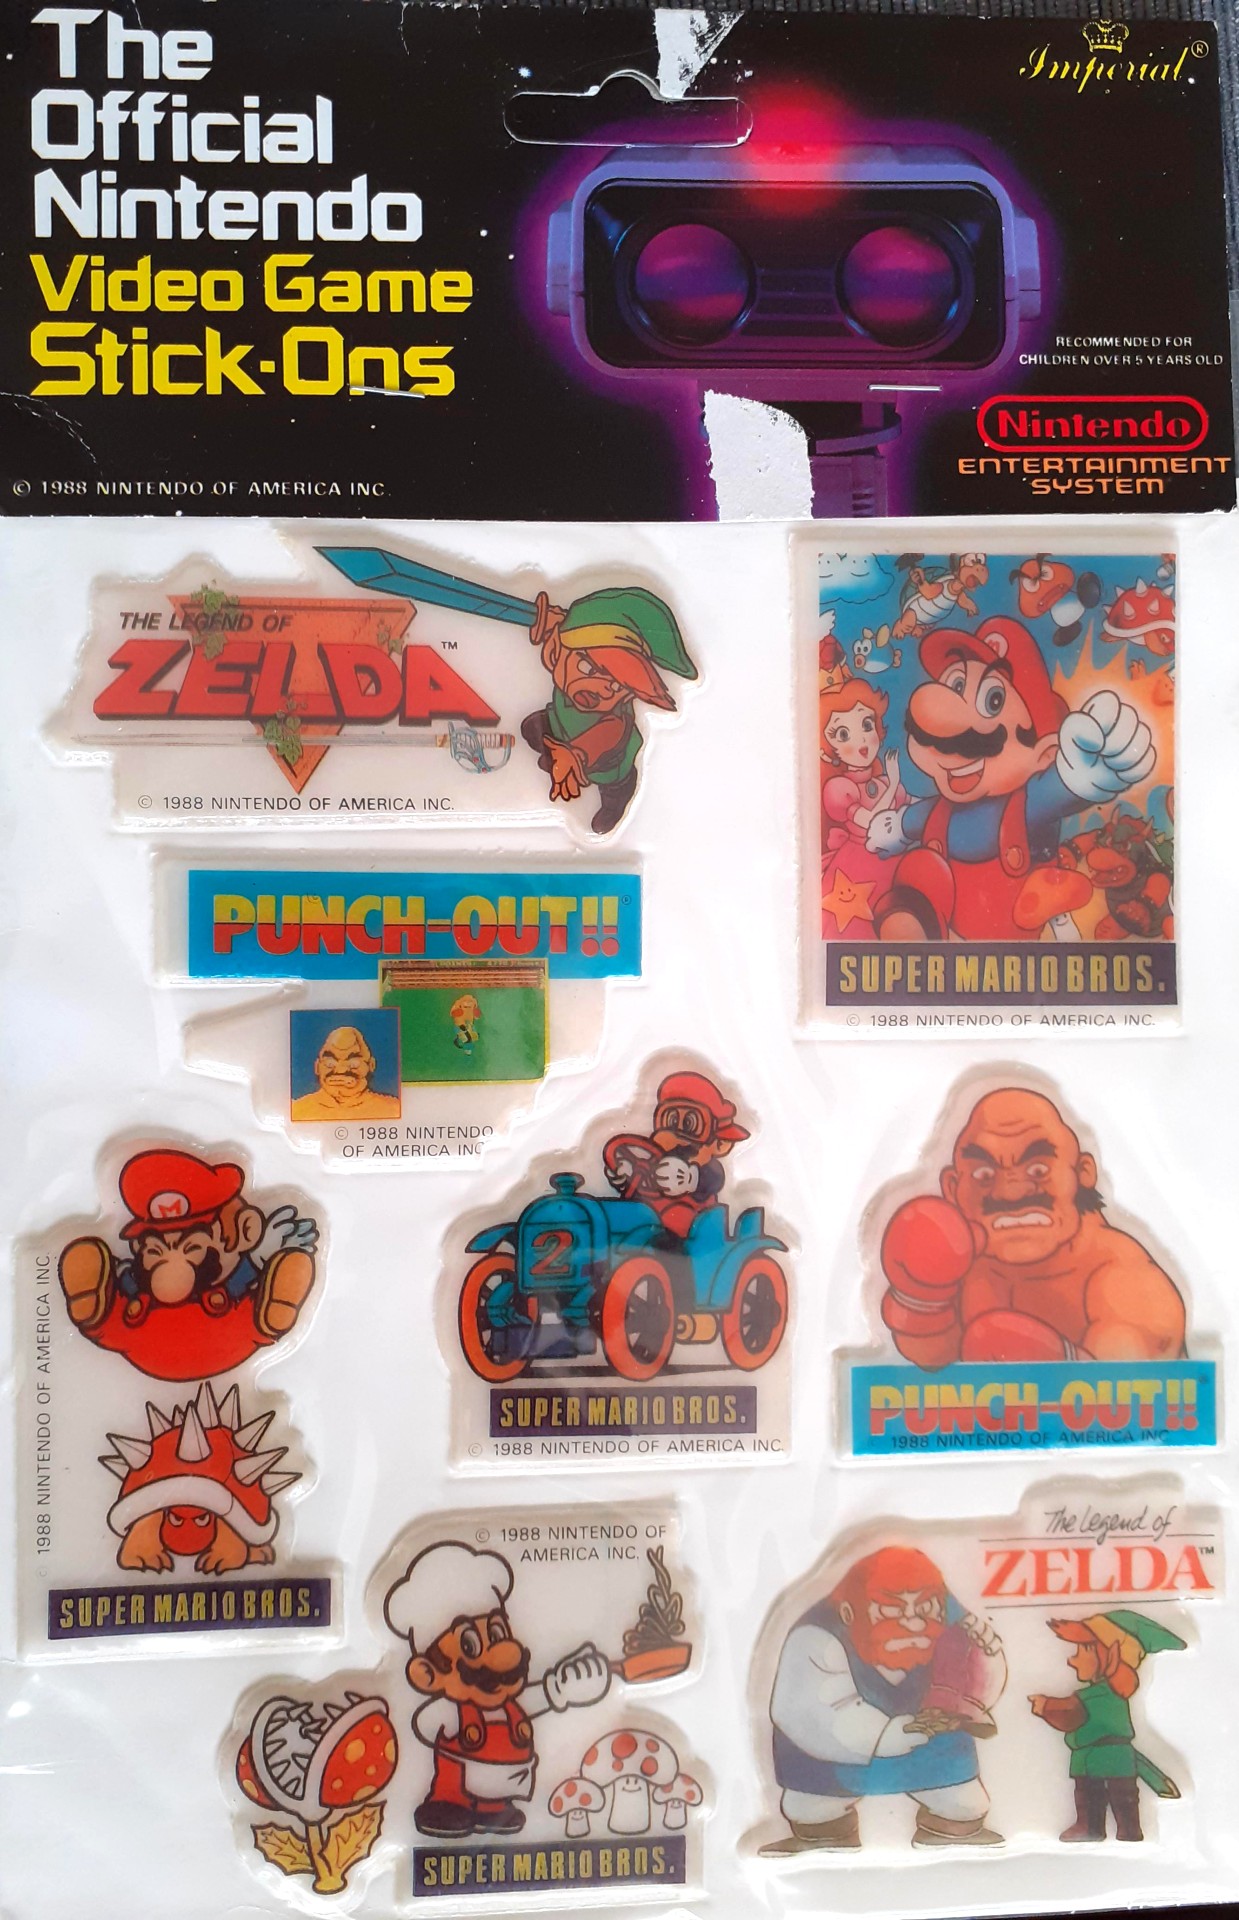 Nintendo Stick-Ons by Imperial, USA 1988.